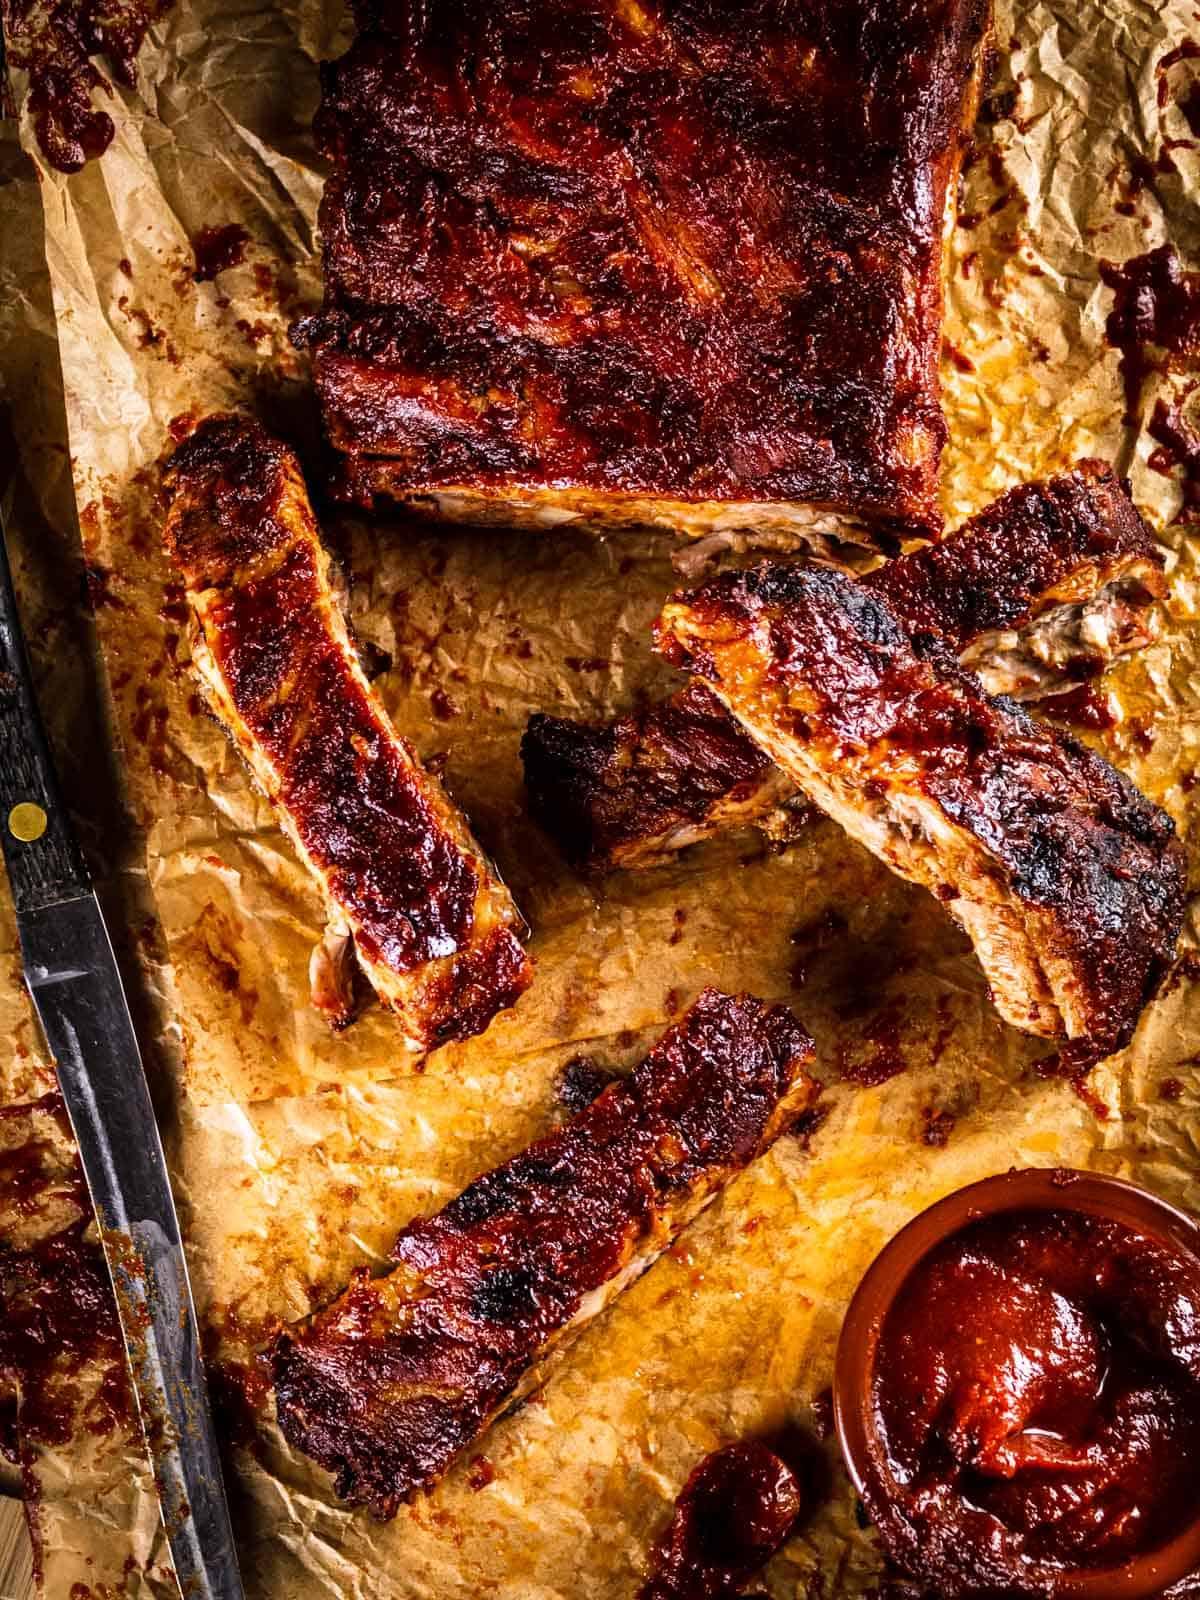 sliced bbq ribs on a table with sauce.